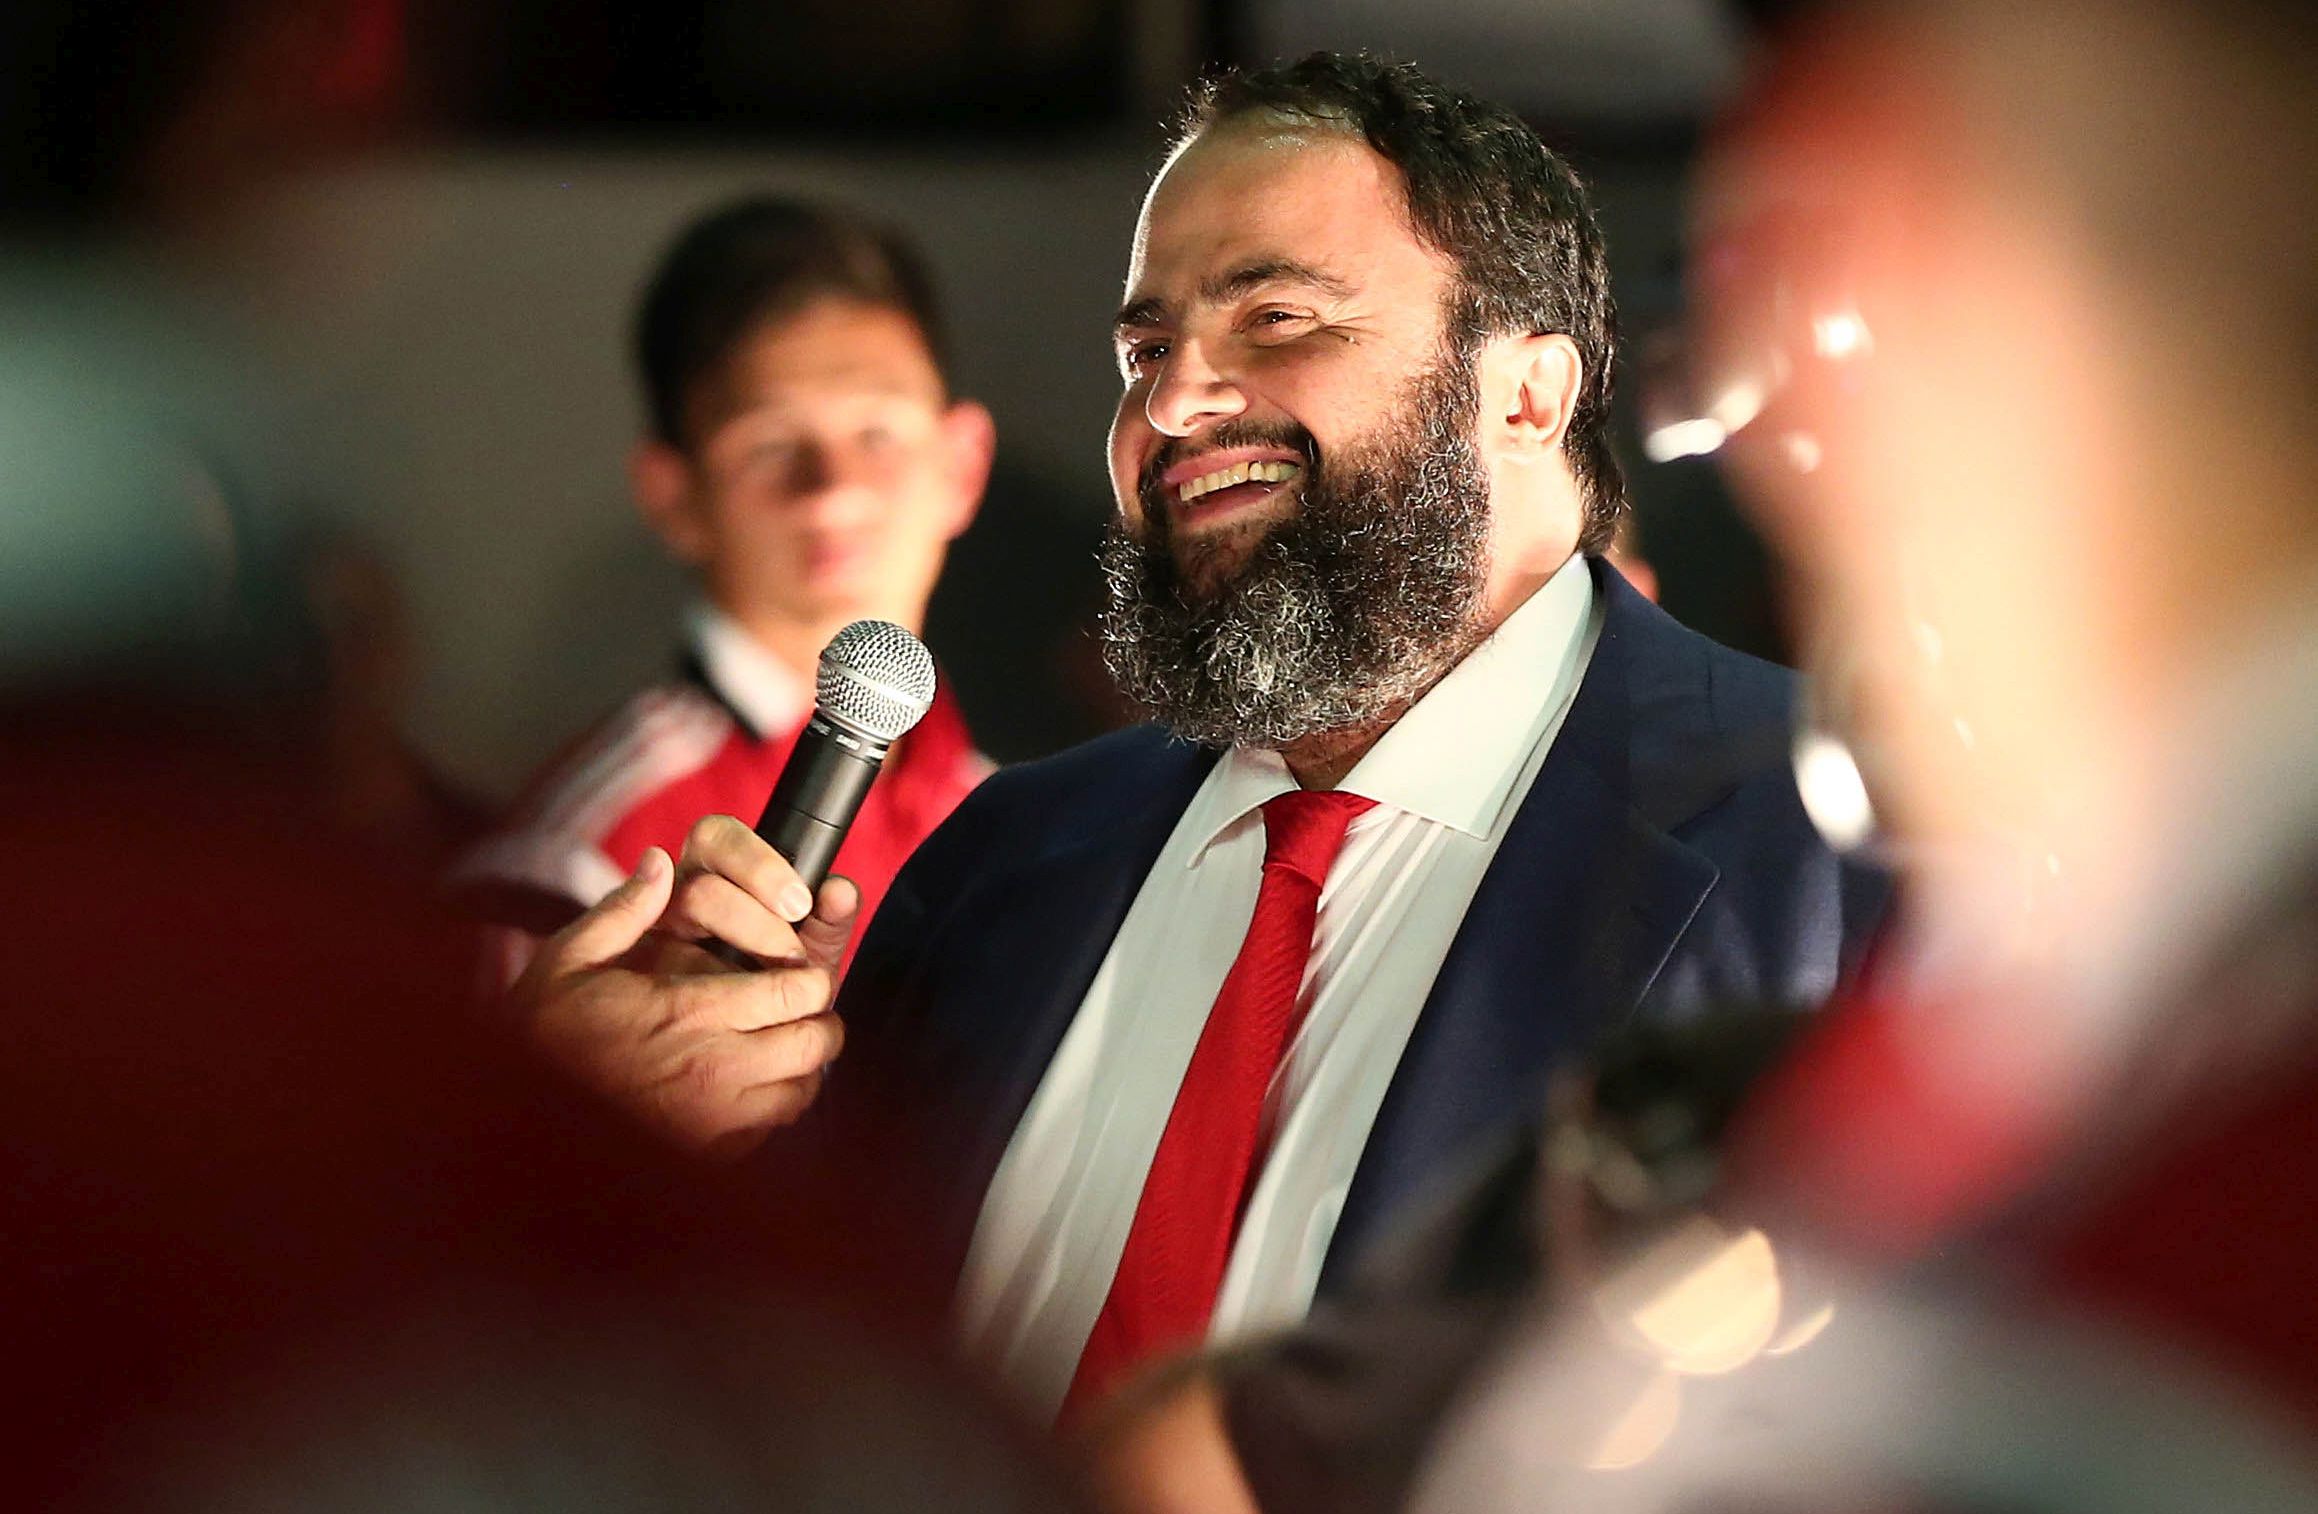 Evangelos Marinakis: “Health, Change, Creation and Victories on all levels”